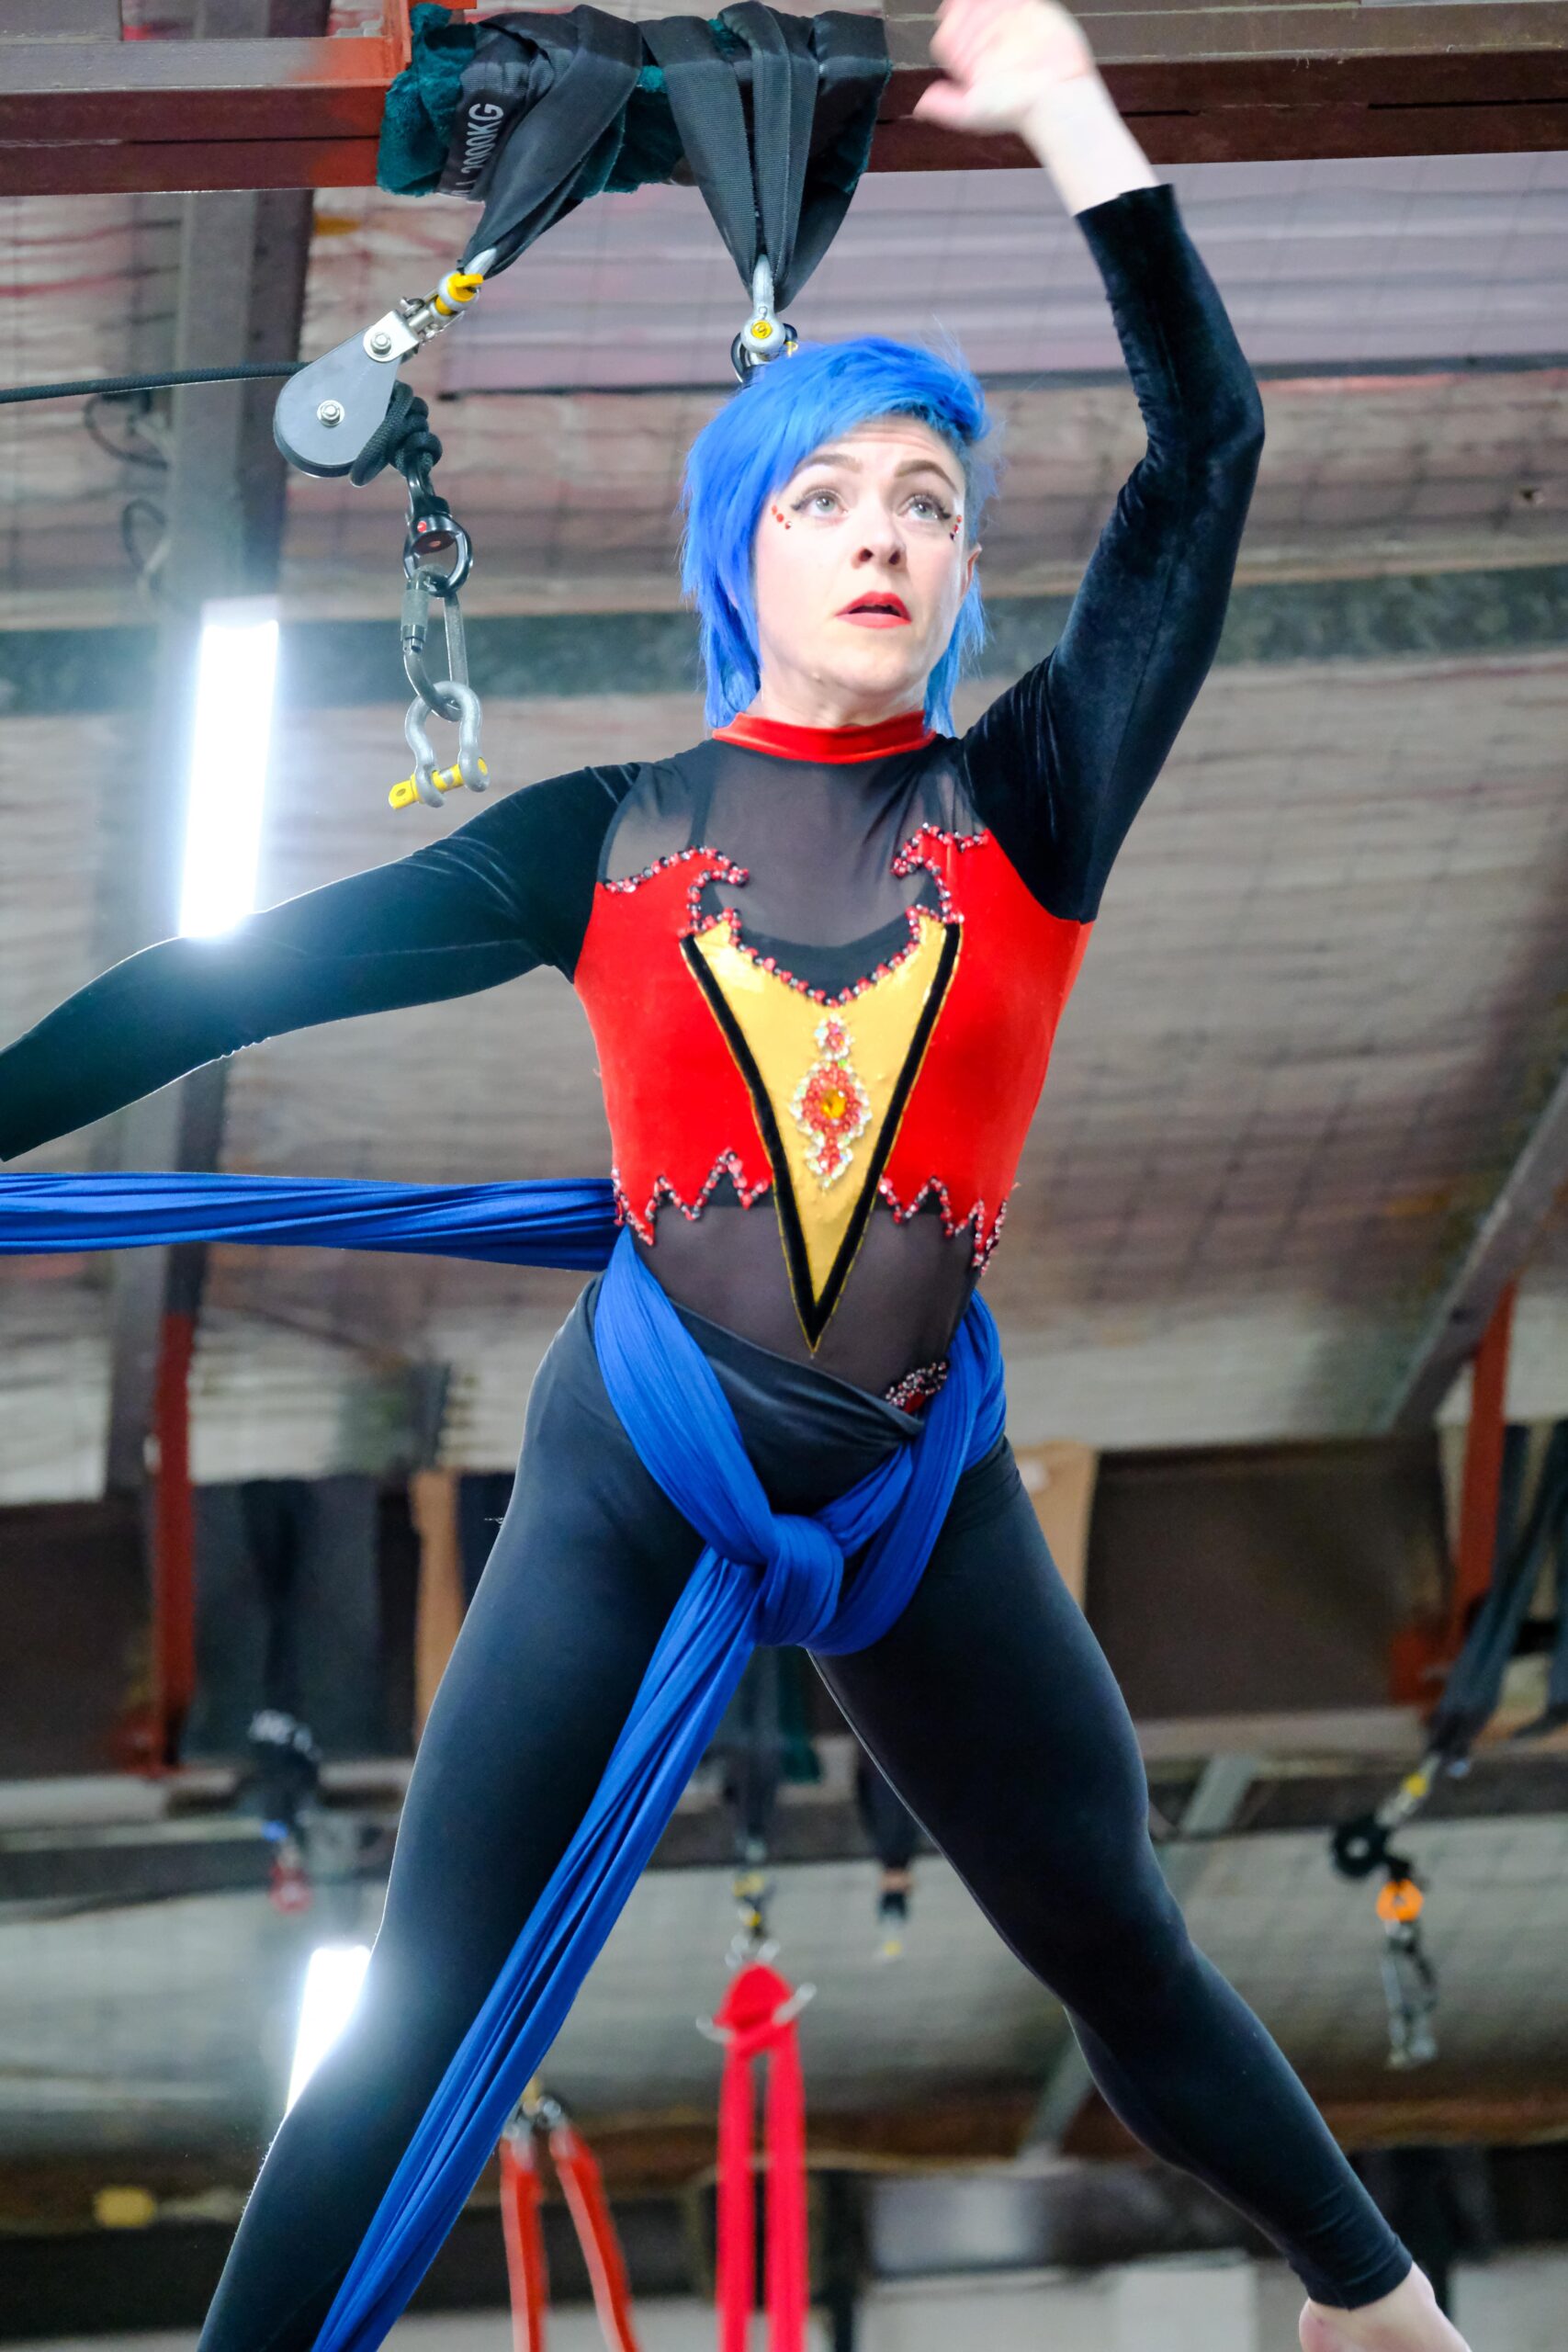 Adults and teens can try aerial classes through active fest with silks lyra or trapeze in a friendly non-competitive environment